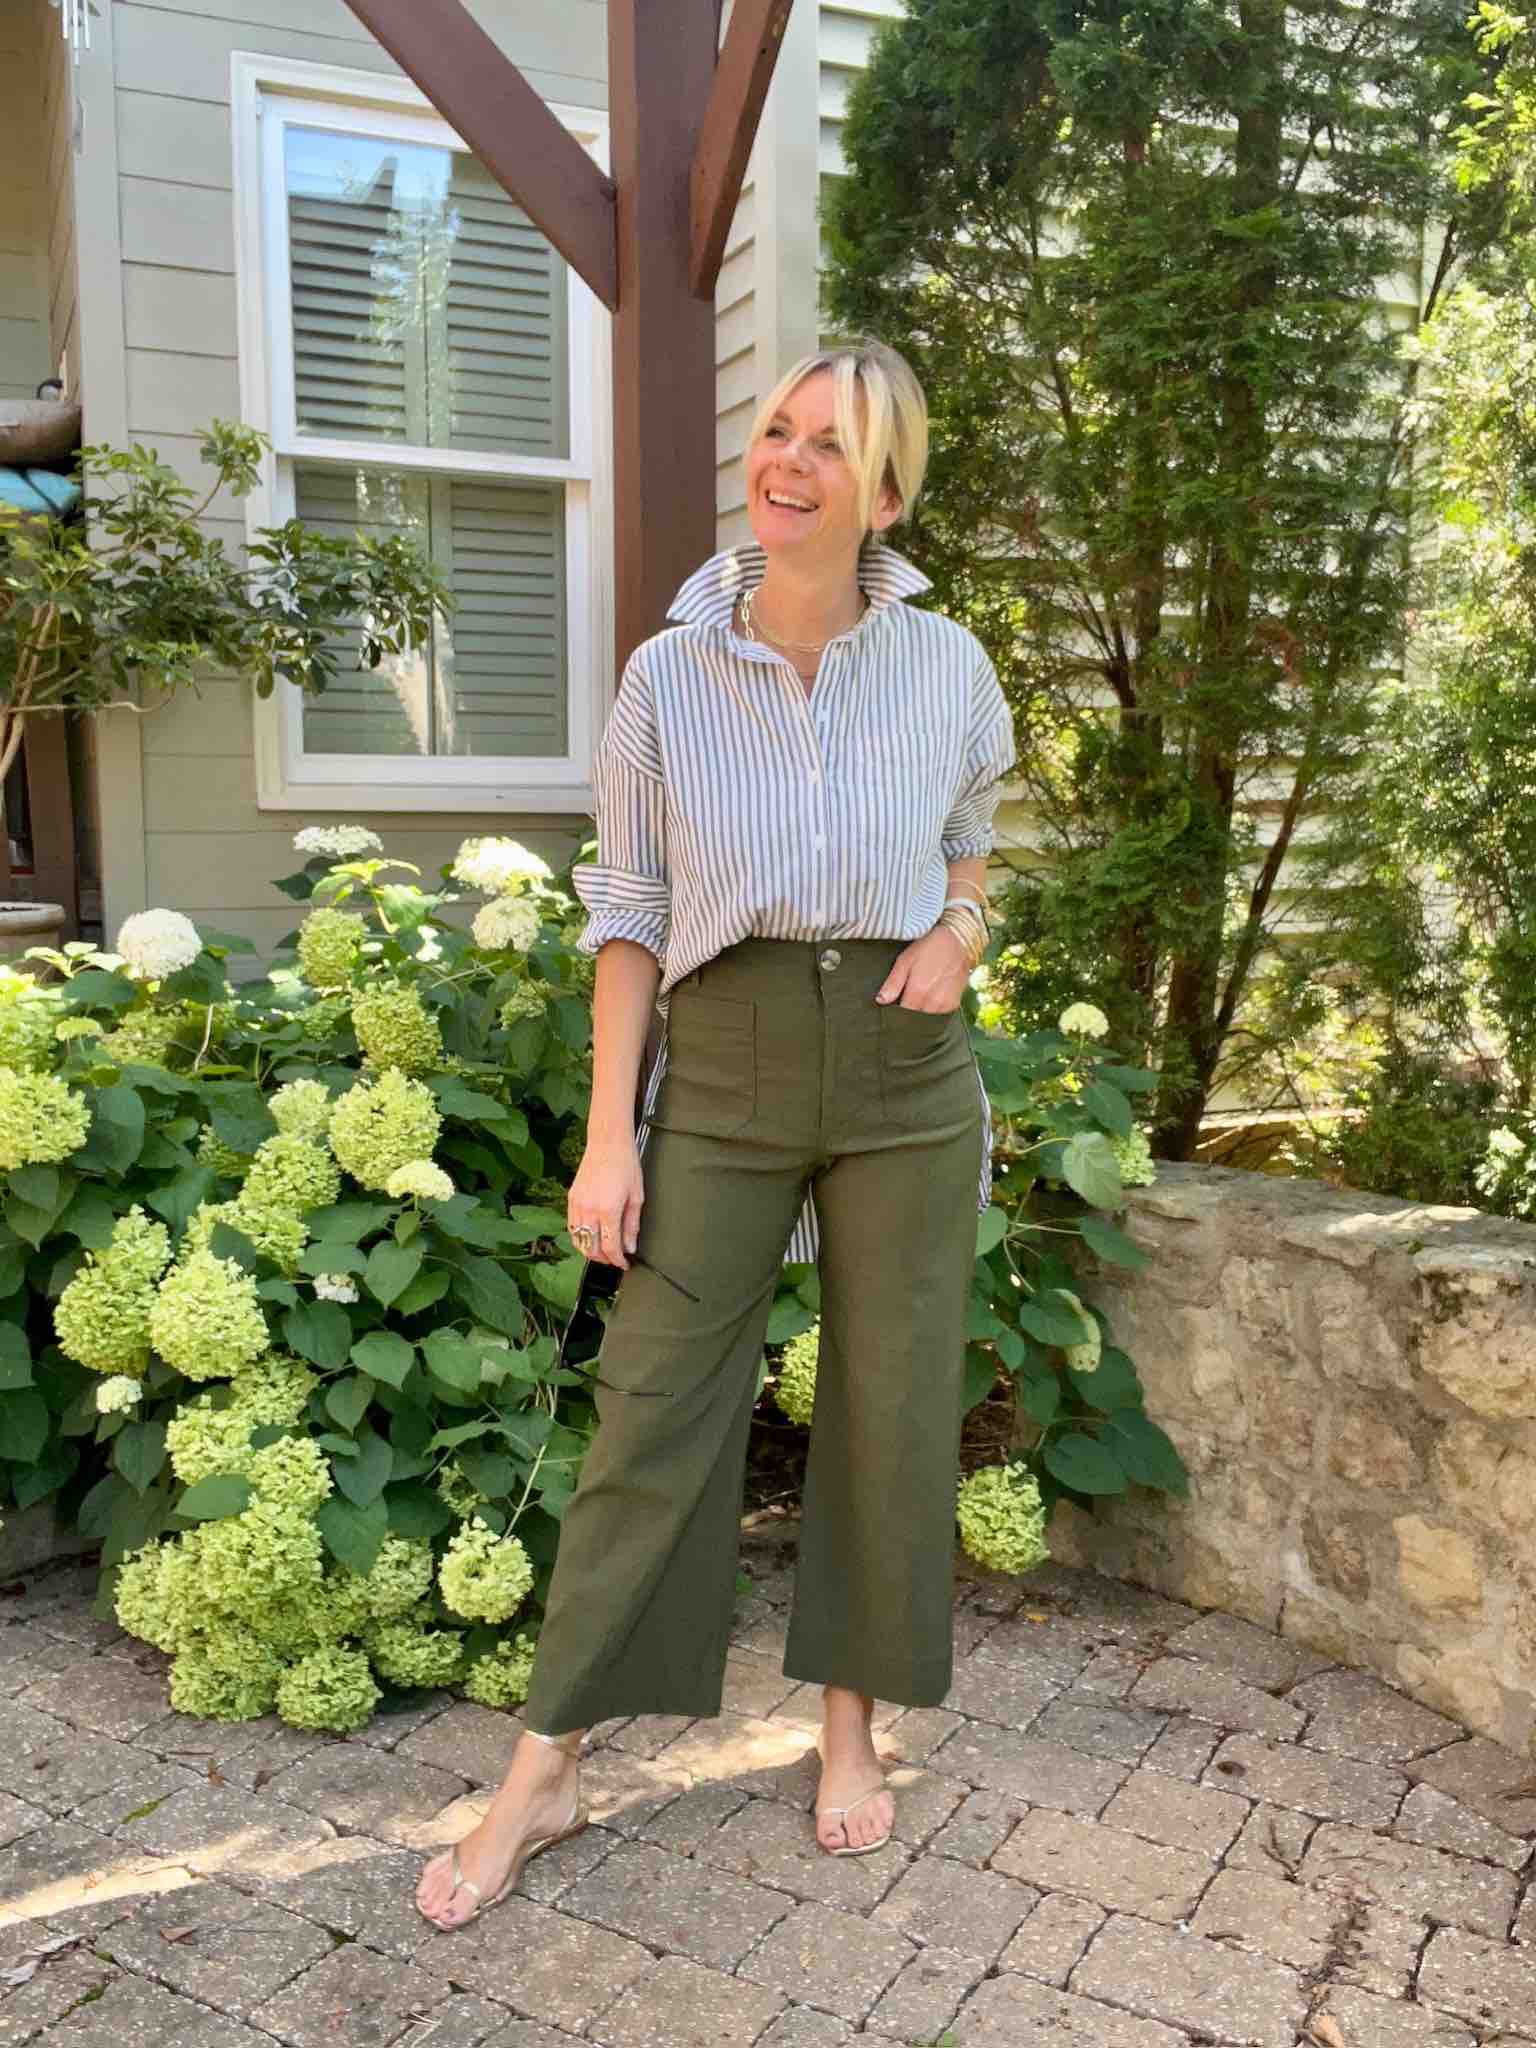 How To Dress For Fall When It's Still Hot Striped Button-Up Shirt & Wide Leg Pants nashville stylists share fun fall looks personal stylists share fall style inspiration what to wear for fall in the southeast what to wear this fall in warmer climates